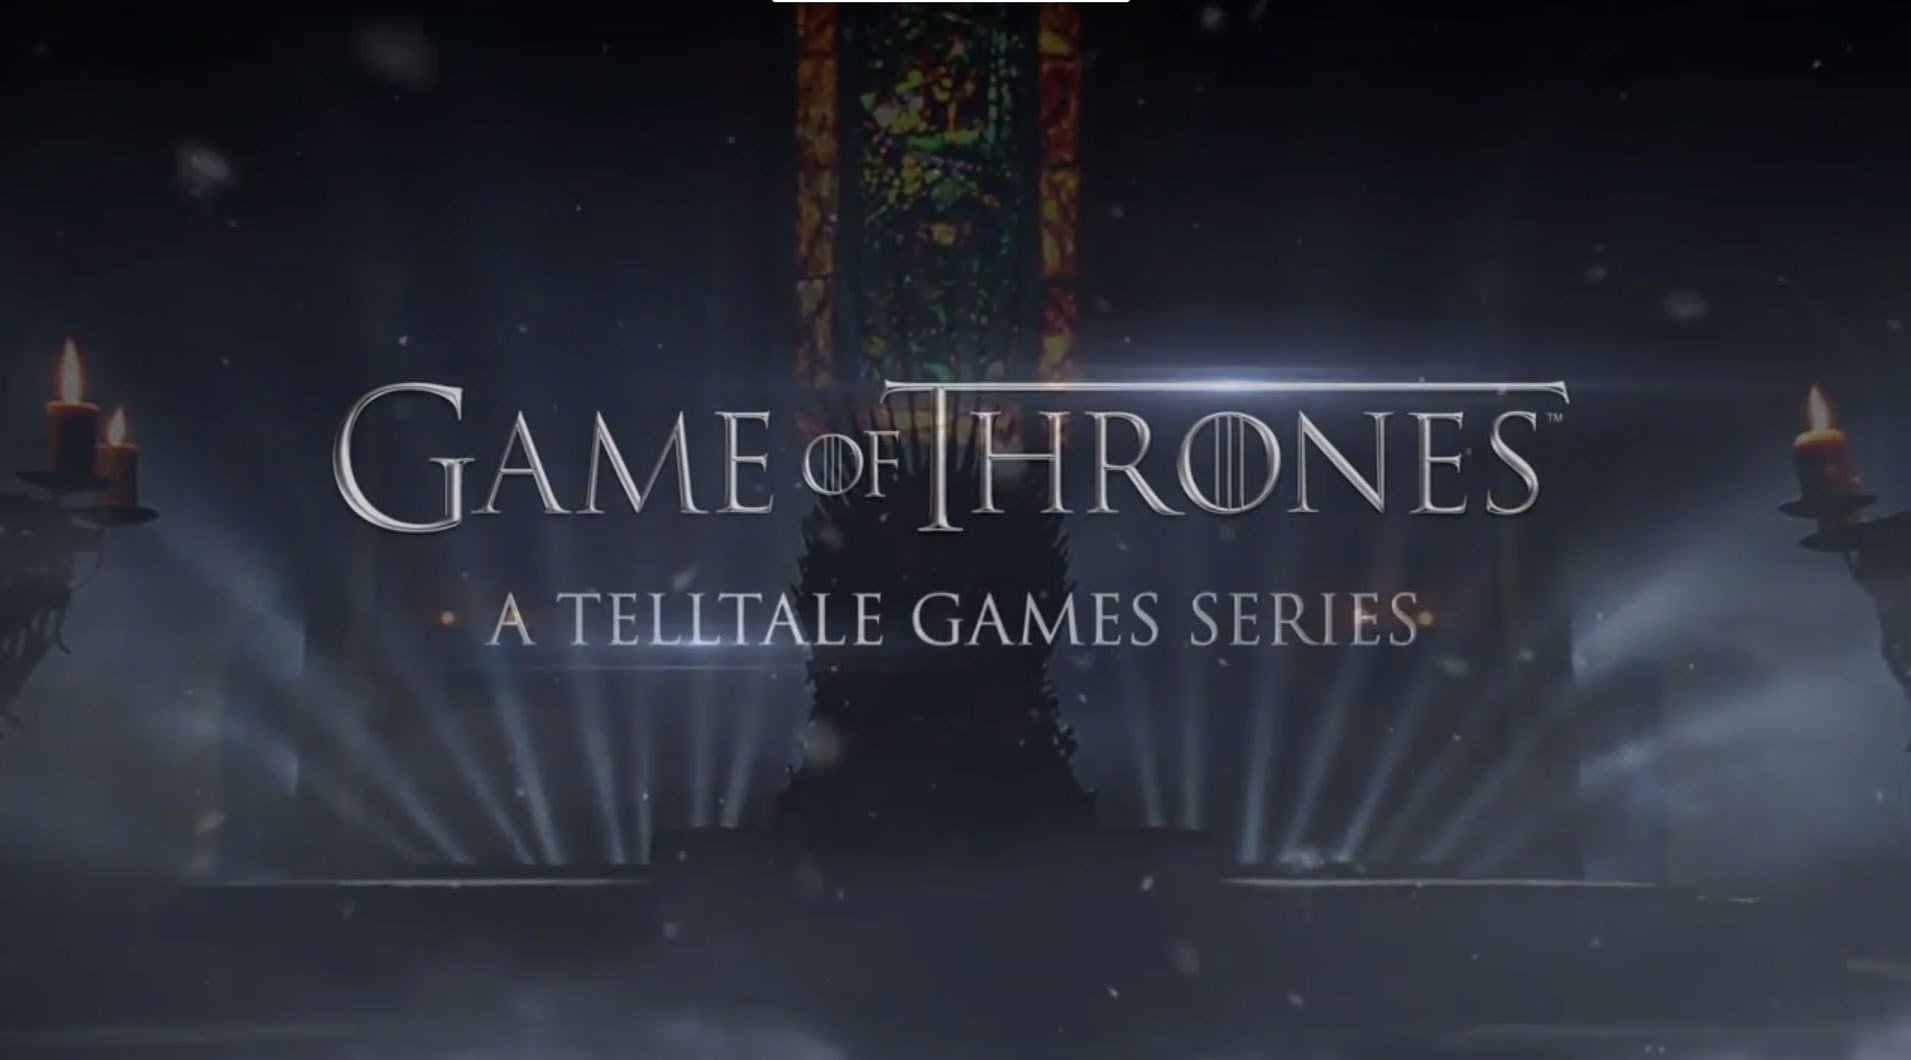 Game of throes a telltale games series